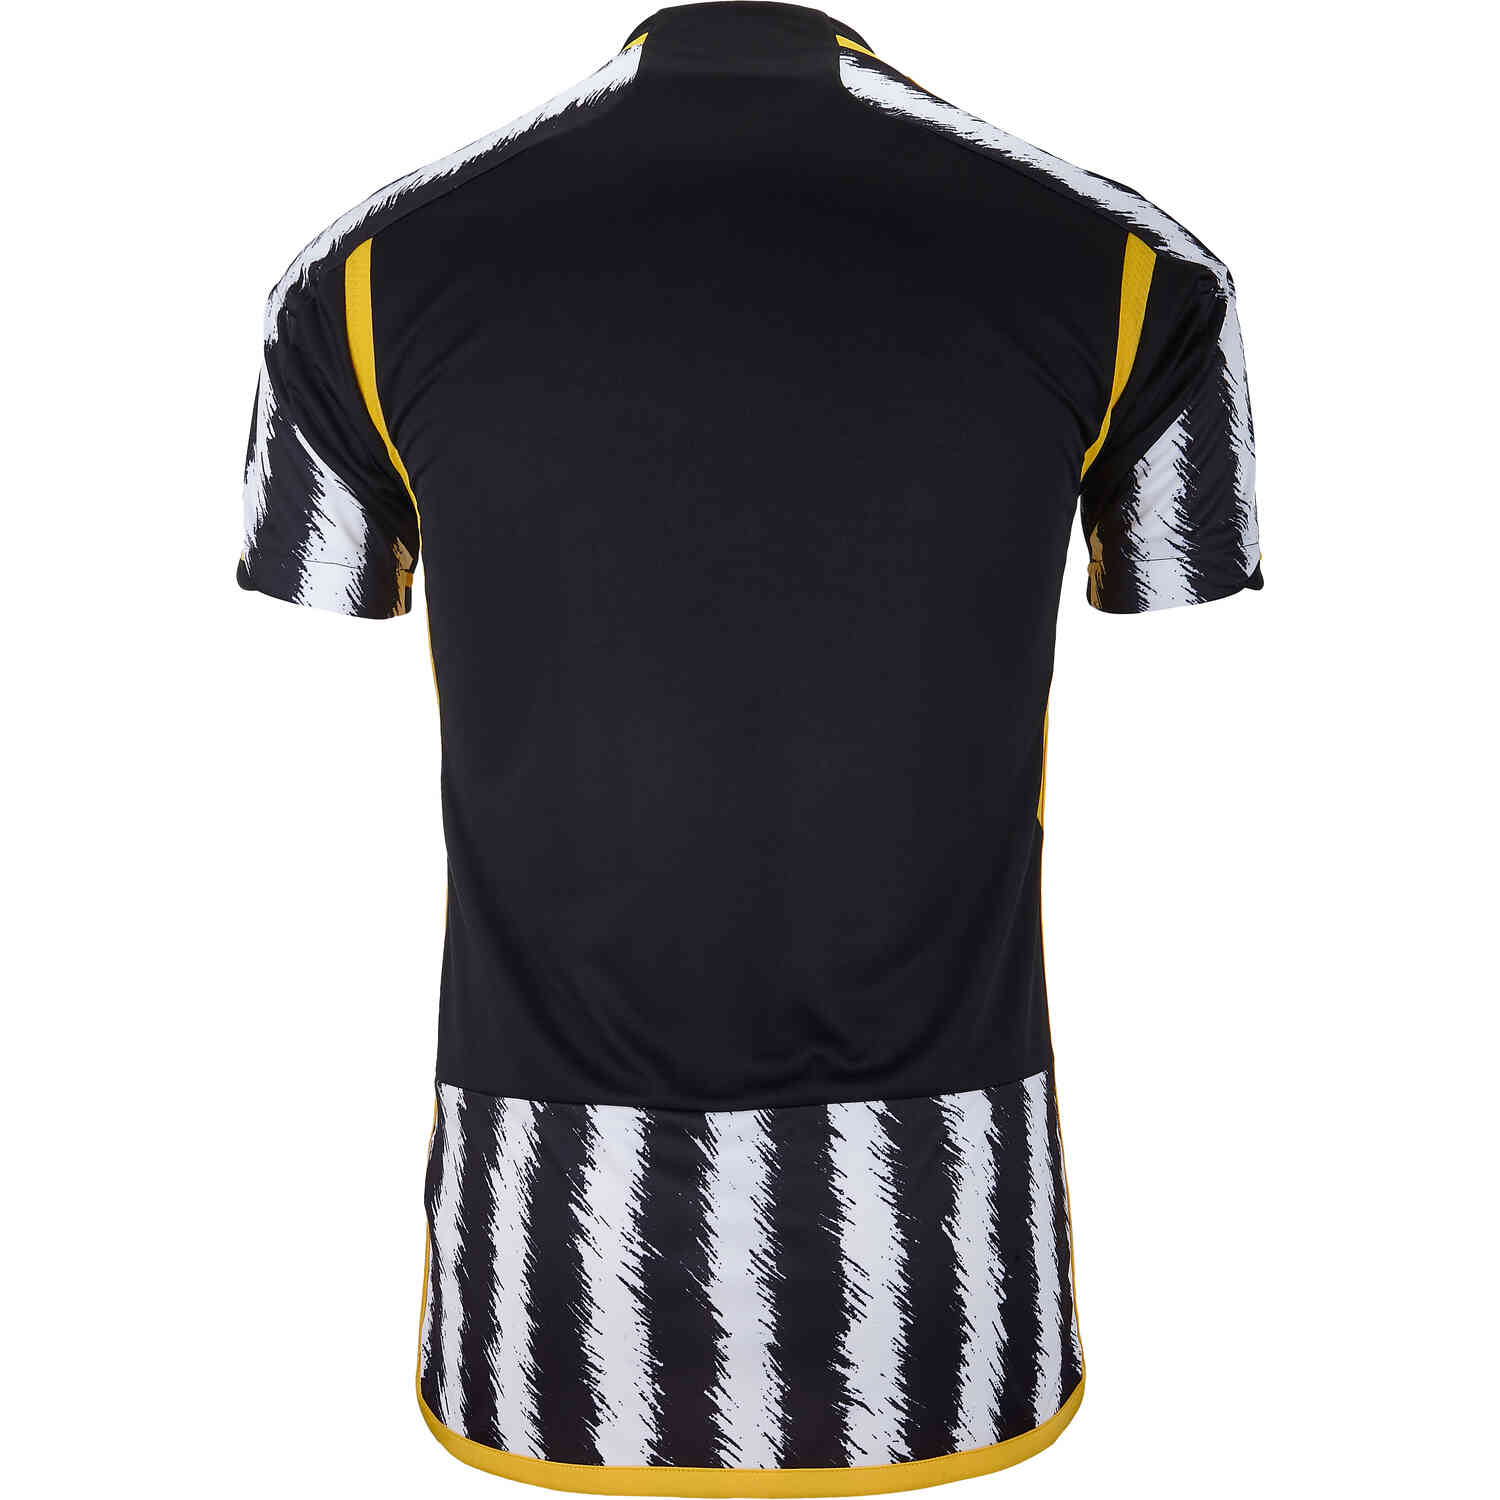 Pictures: Adidas releases Juventus and Italy's retro kits - Football Italia